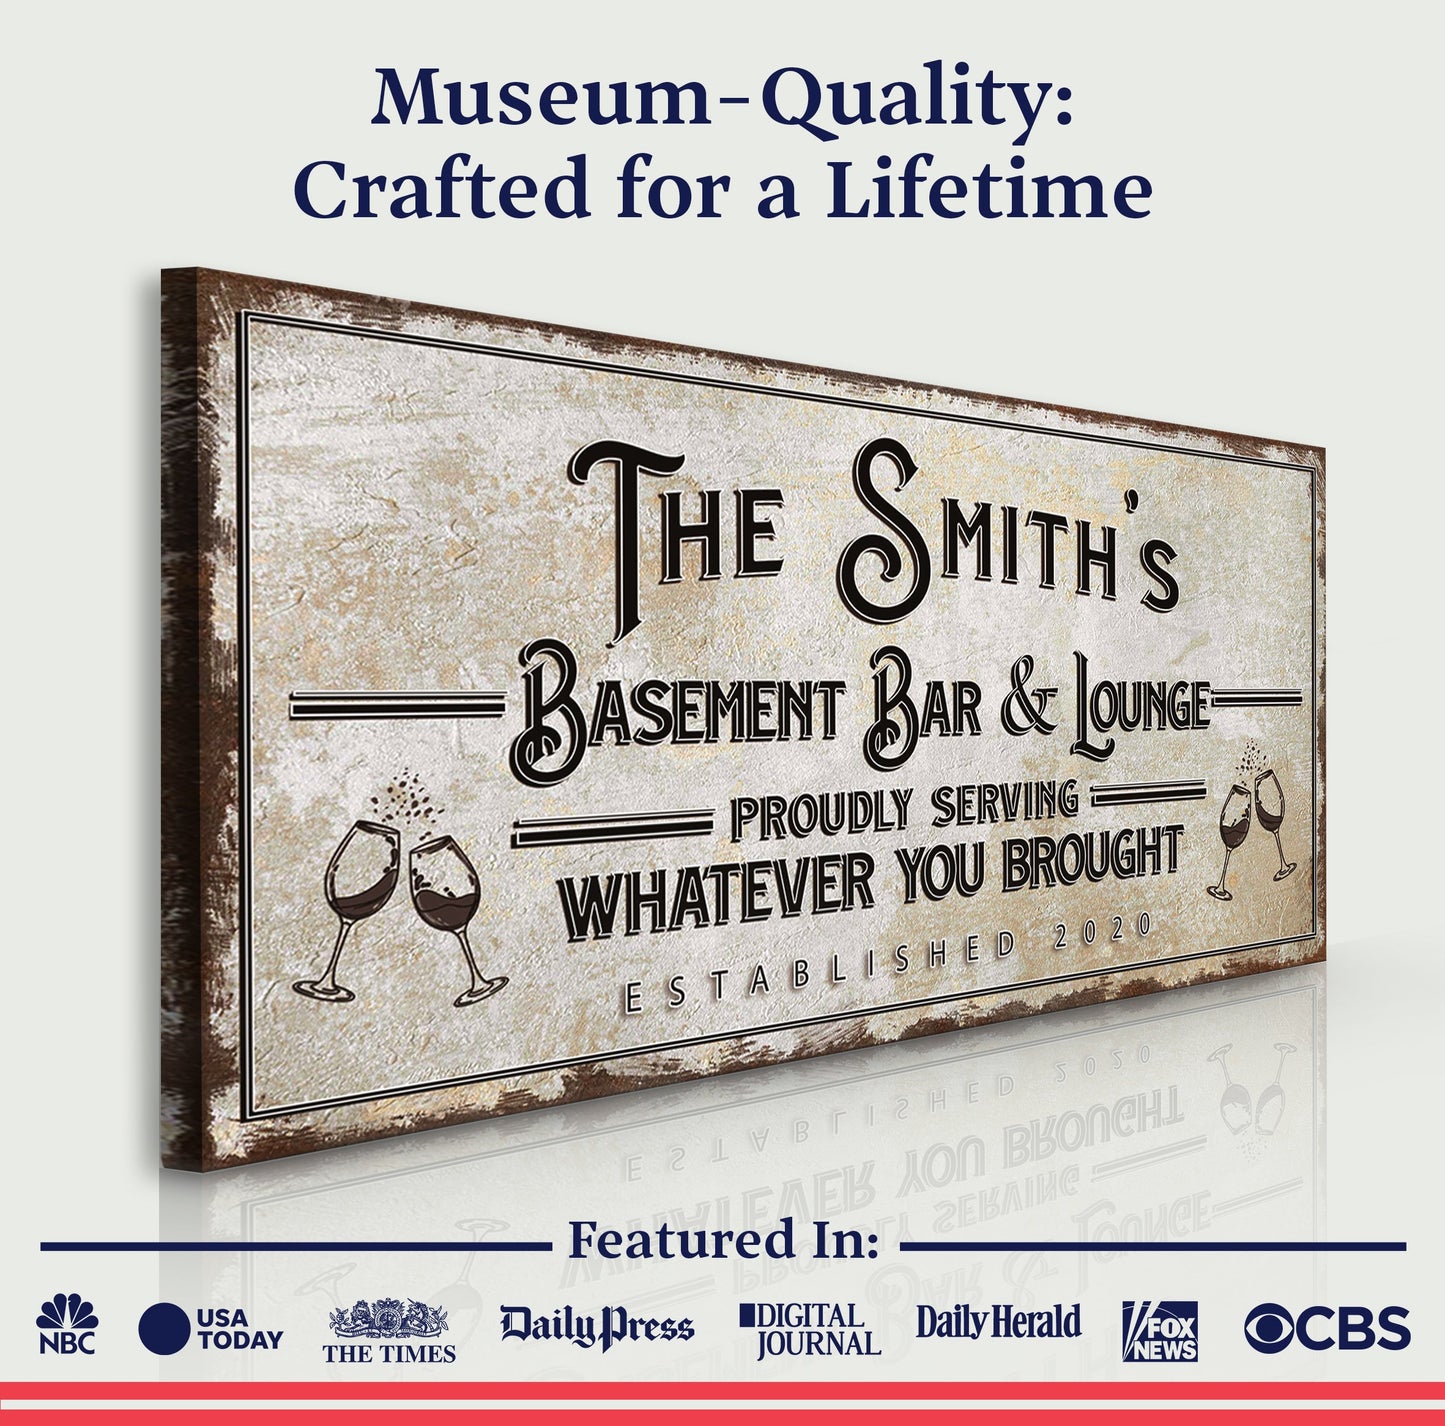 Personalized Basement Bar Sign: Rustic Modern Decor for Your Home Bar – Perfect Last Minute Anniversary Gift for Him